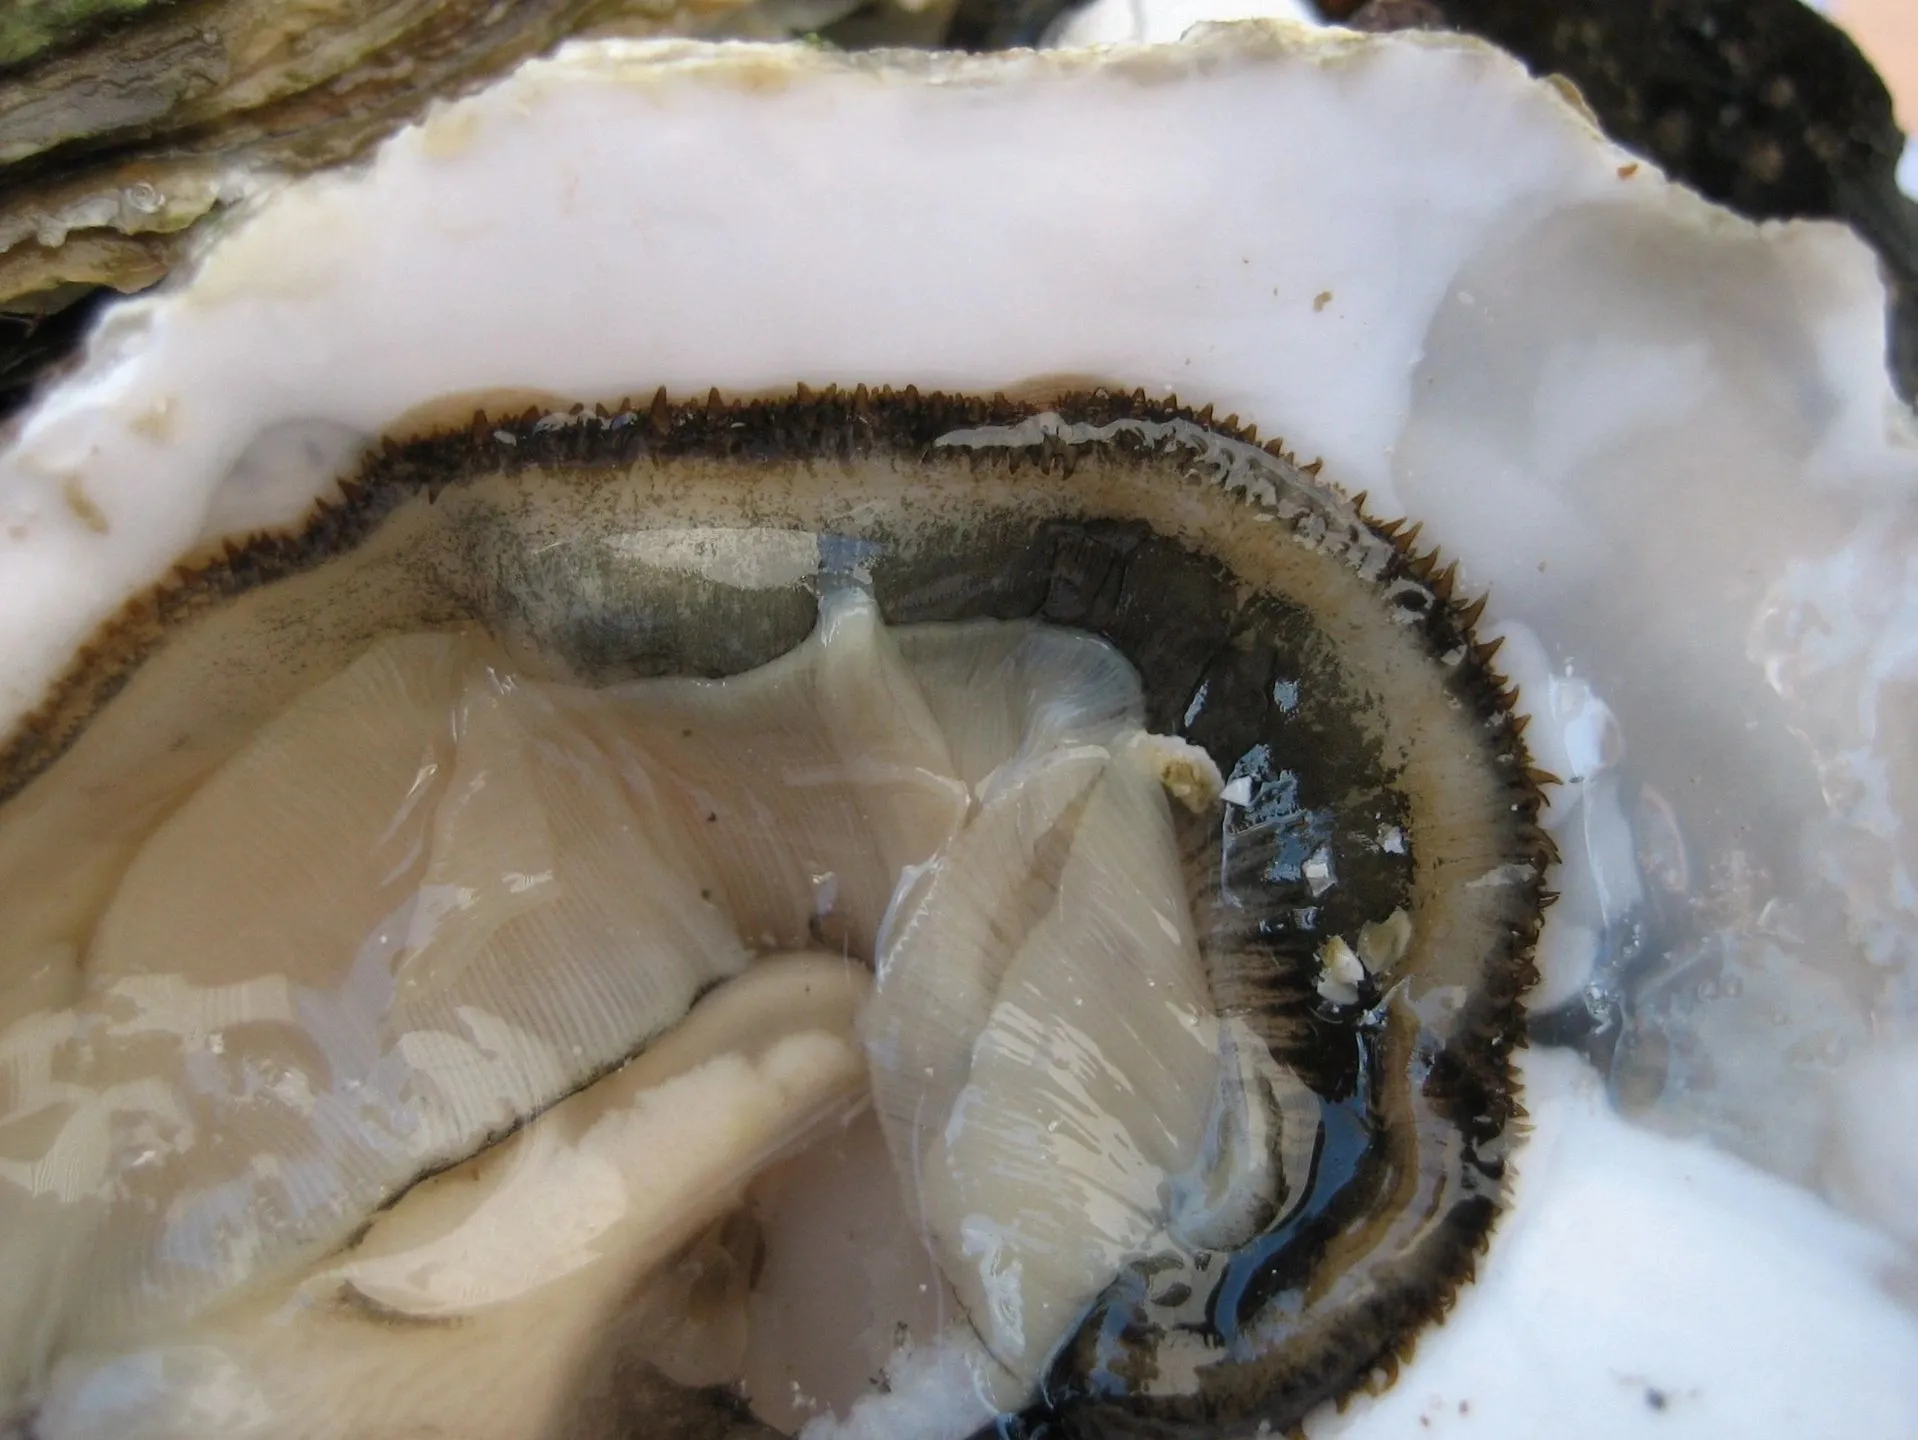 A close up of an open oyster shell